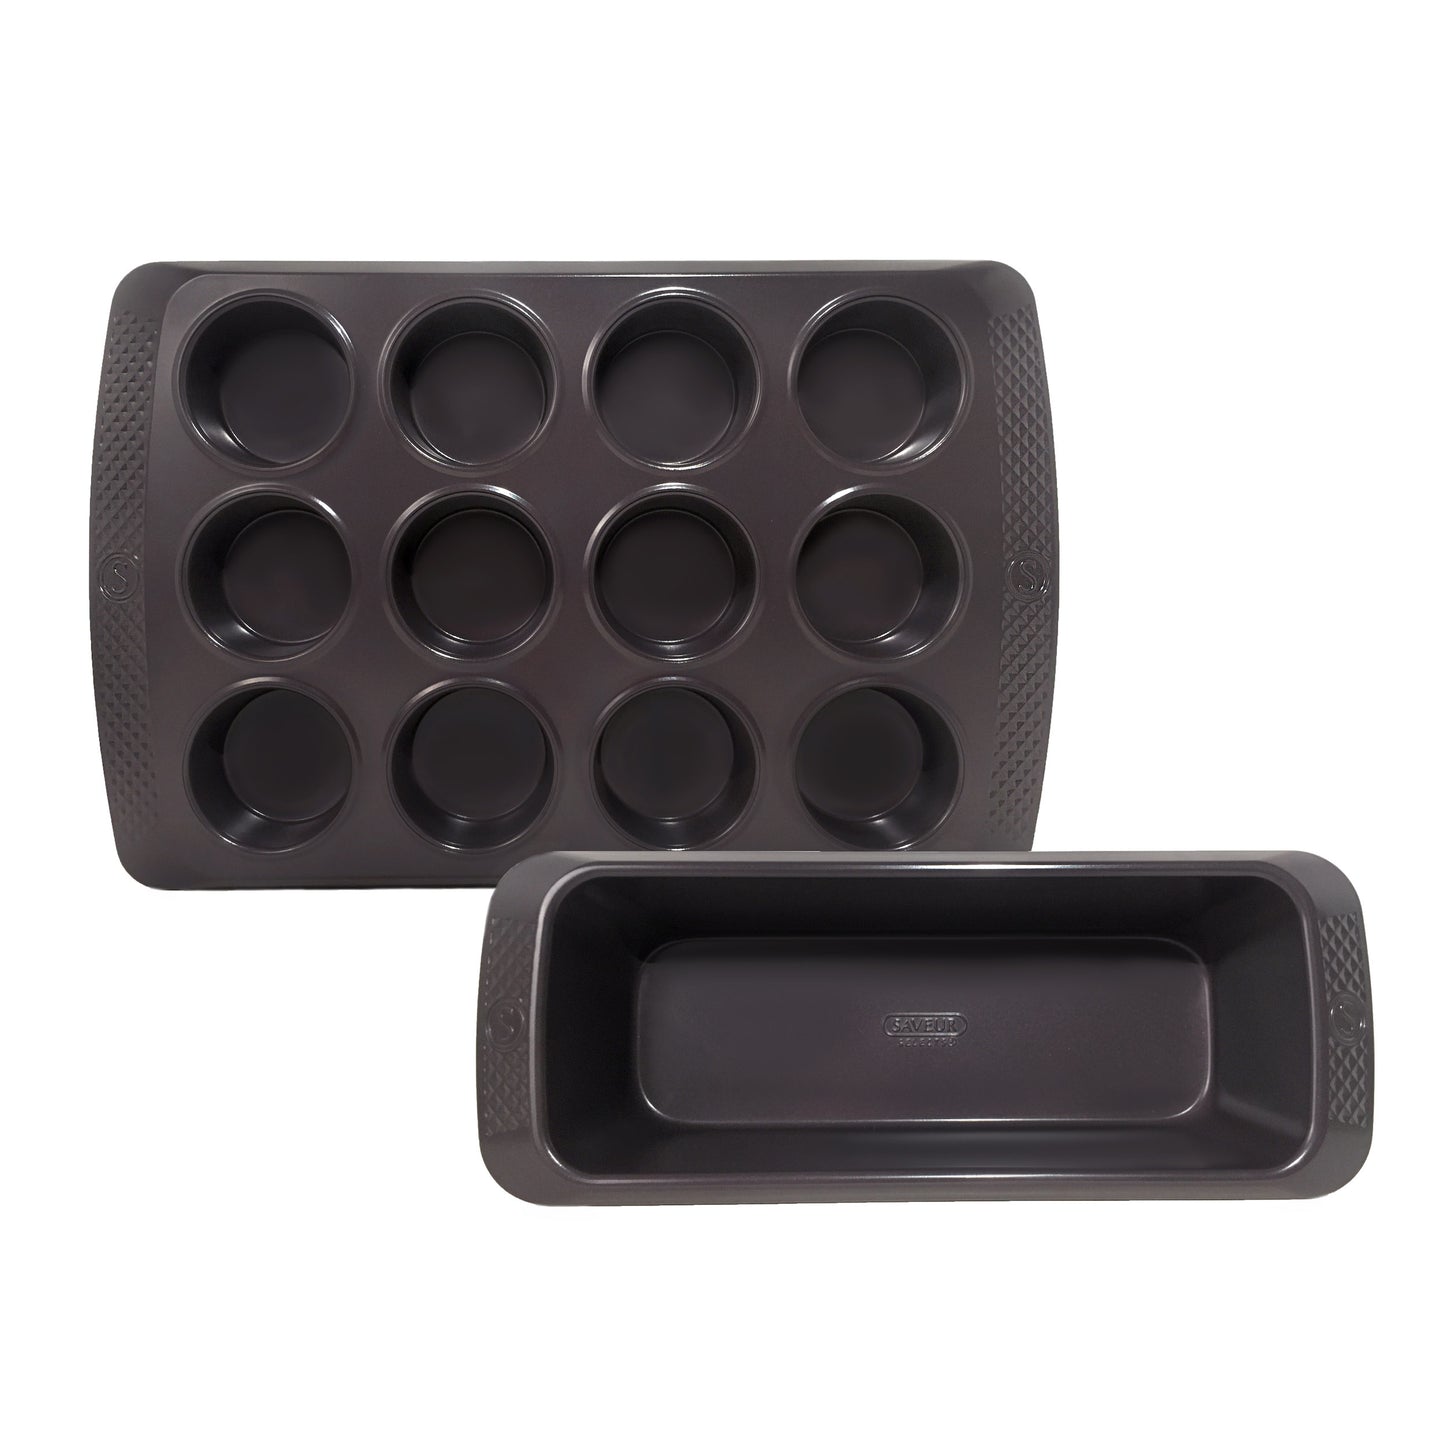 Loaf and Muffin Pan Bakeware Set